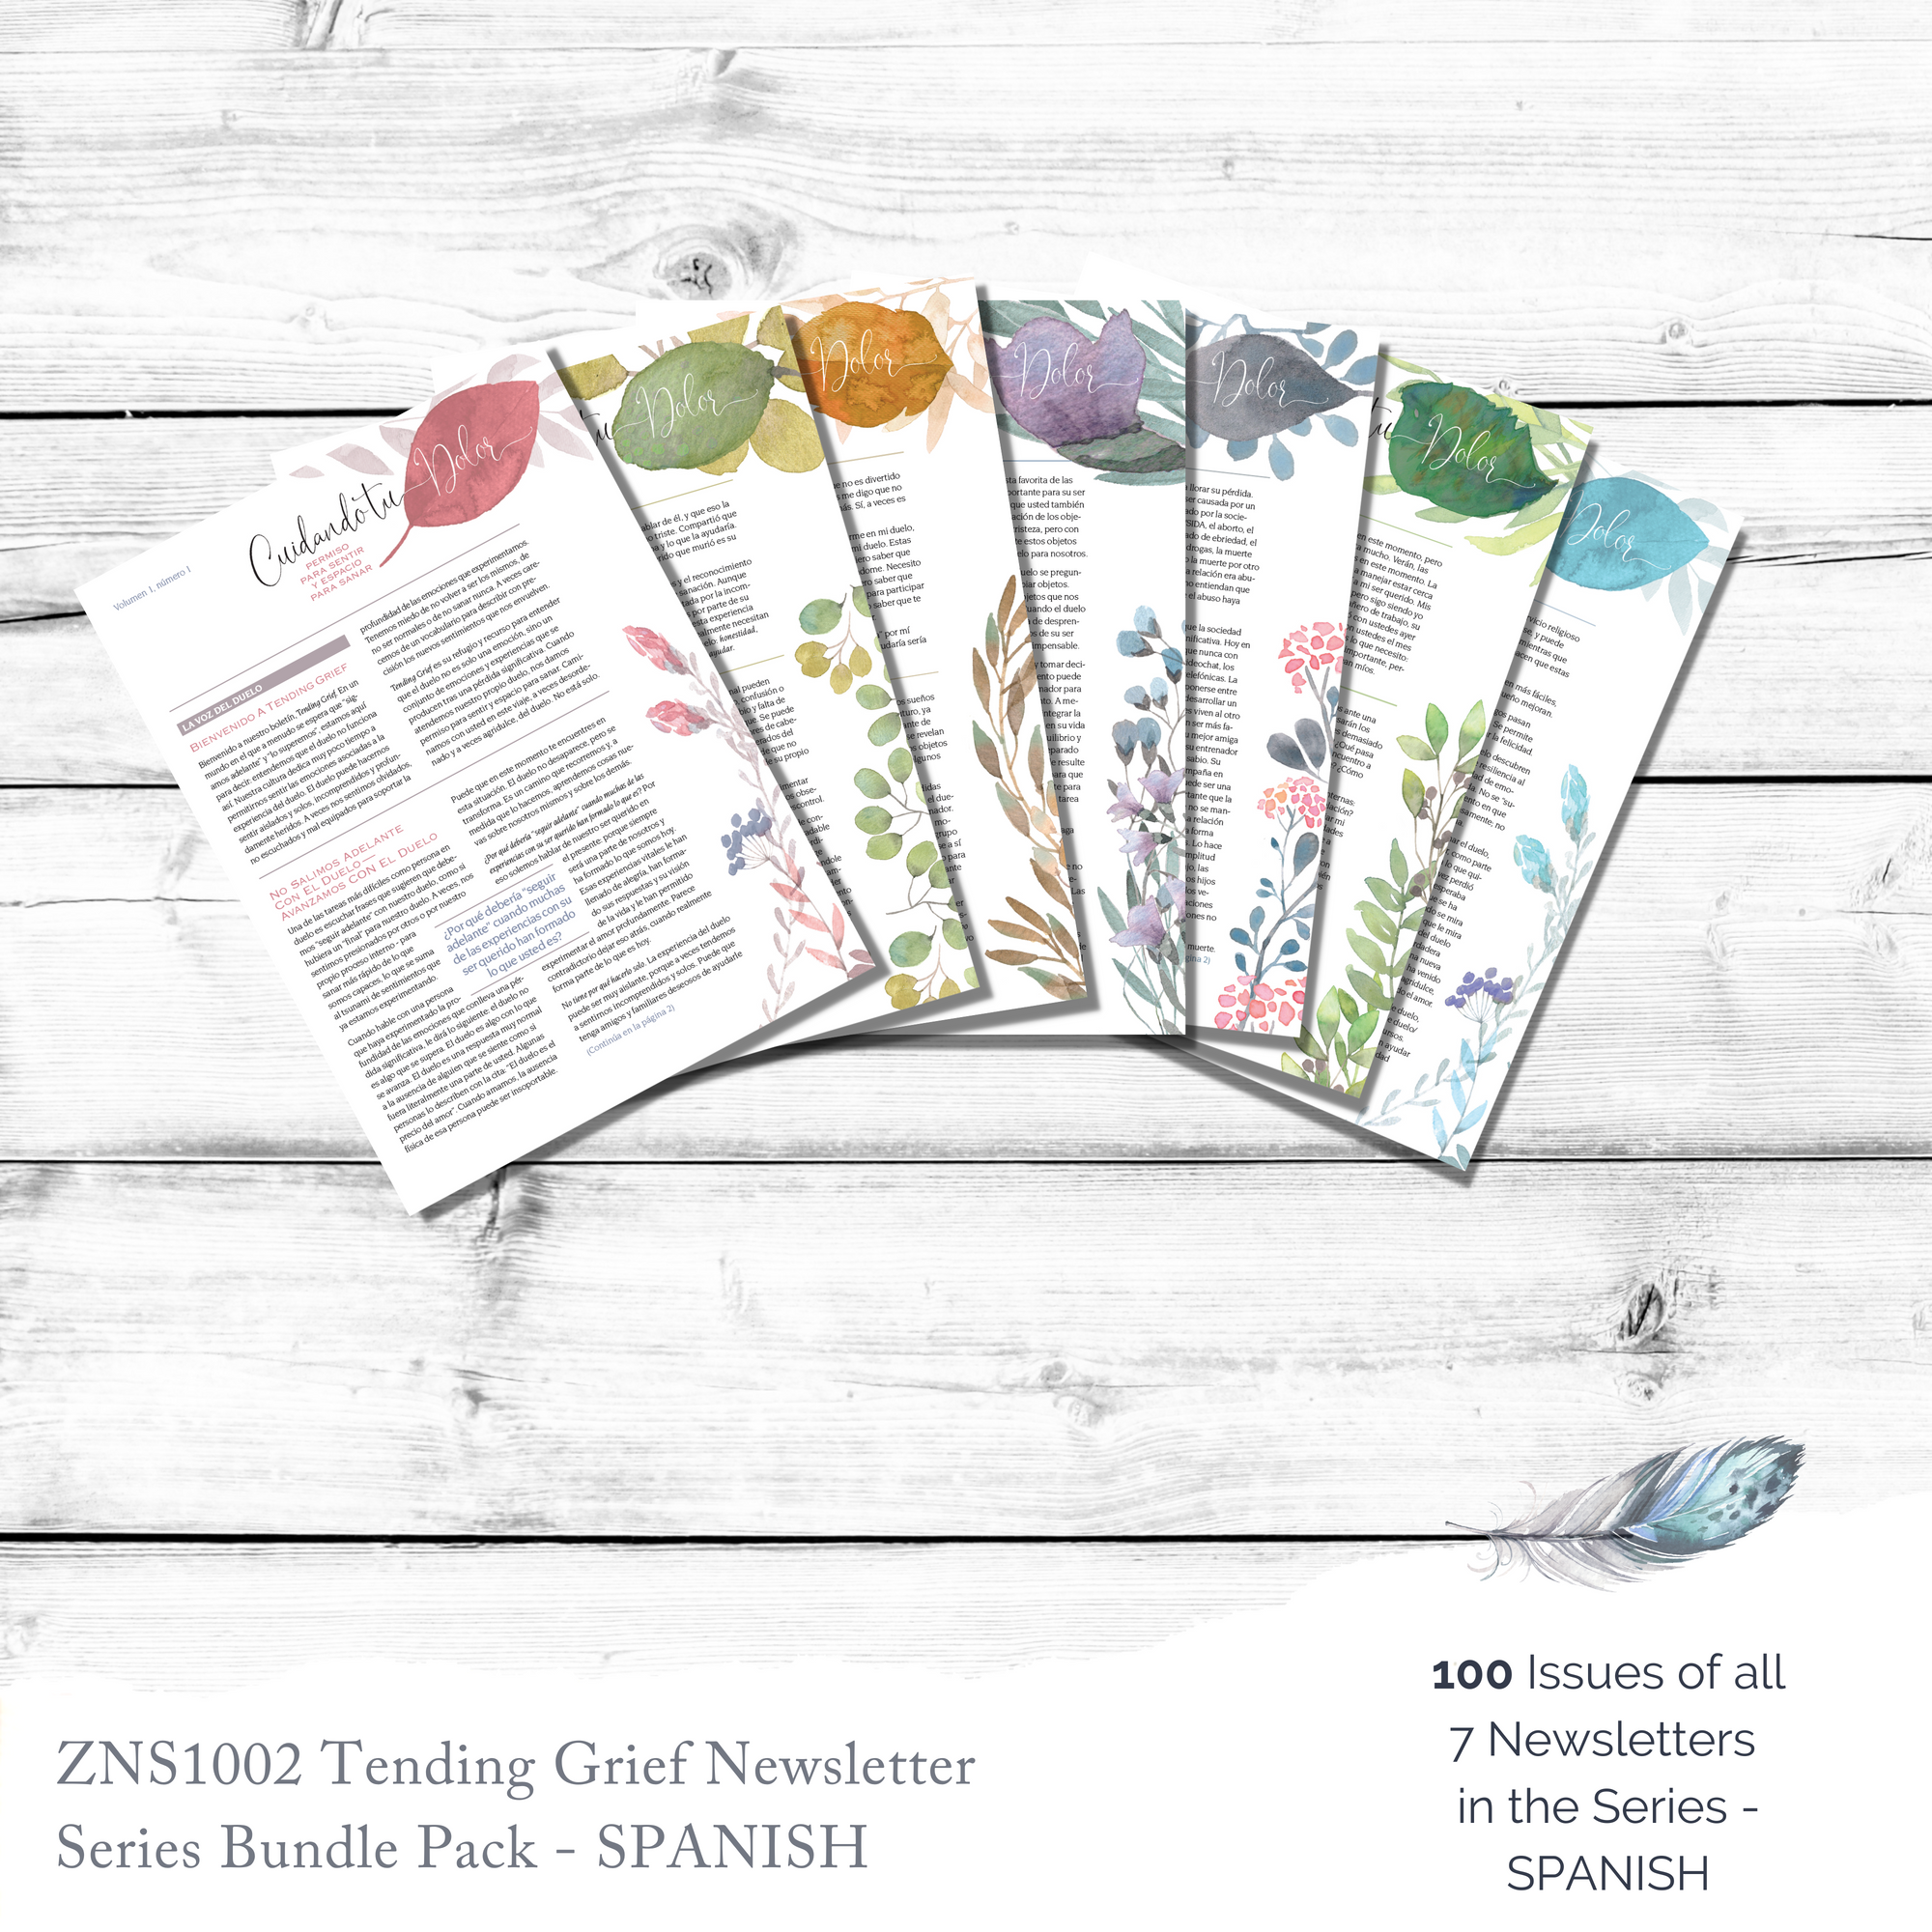 ZNS1002 | SPANISH Tending Grief Newsletter Series Bundle Pack (100 issues of all 7 issues in series)